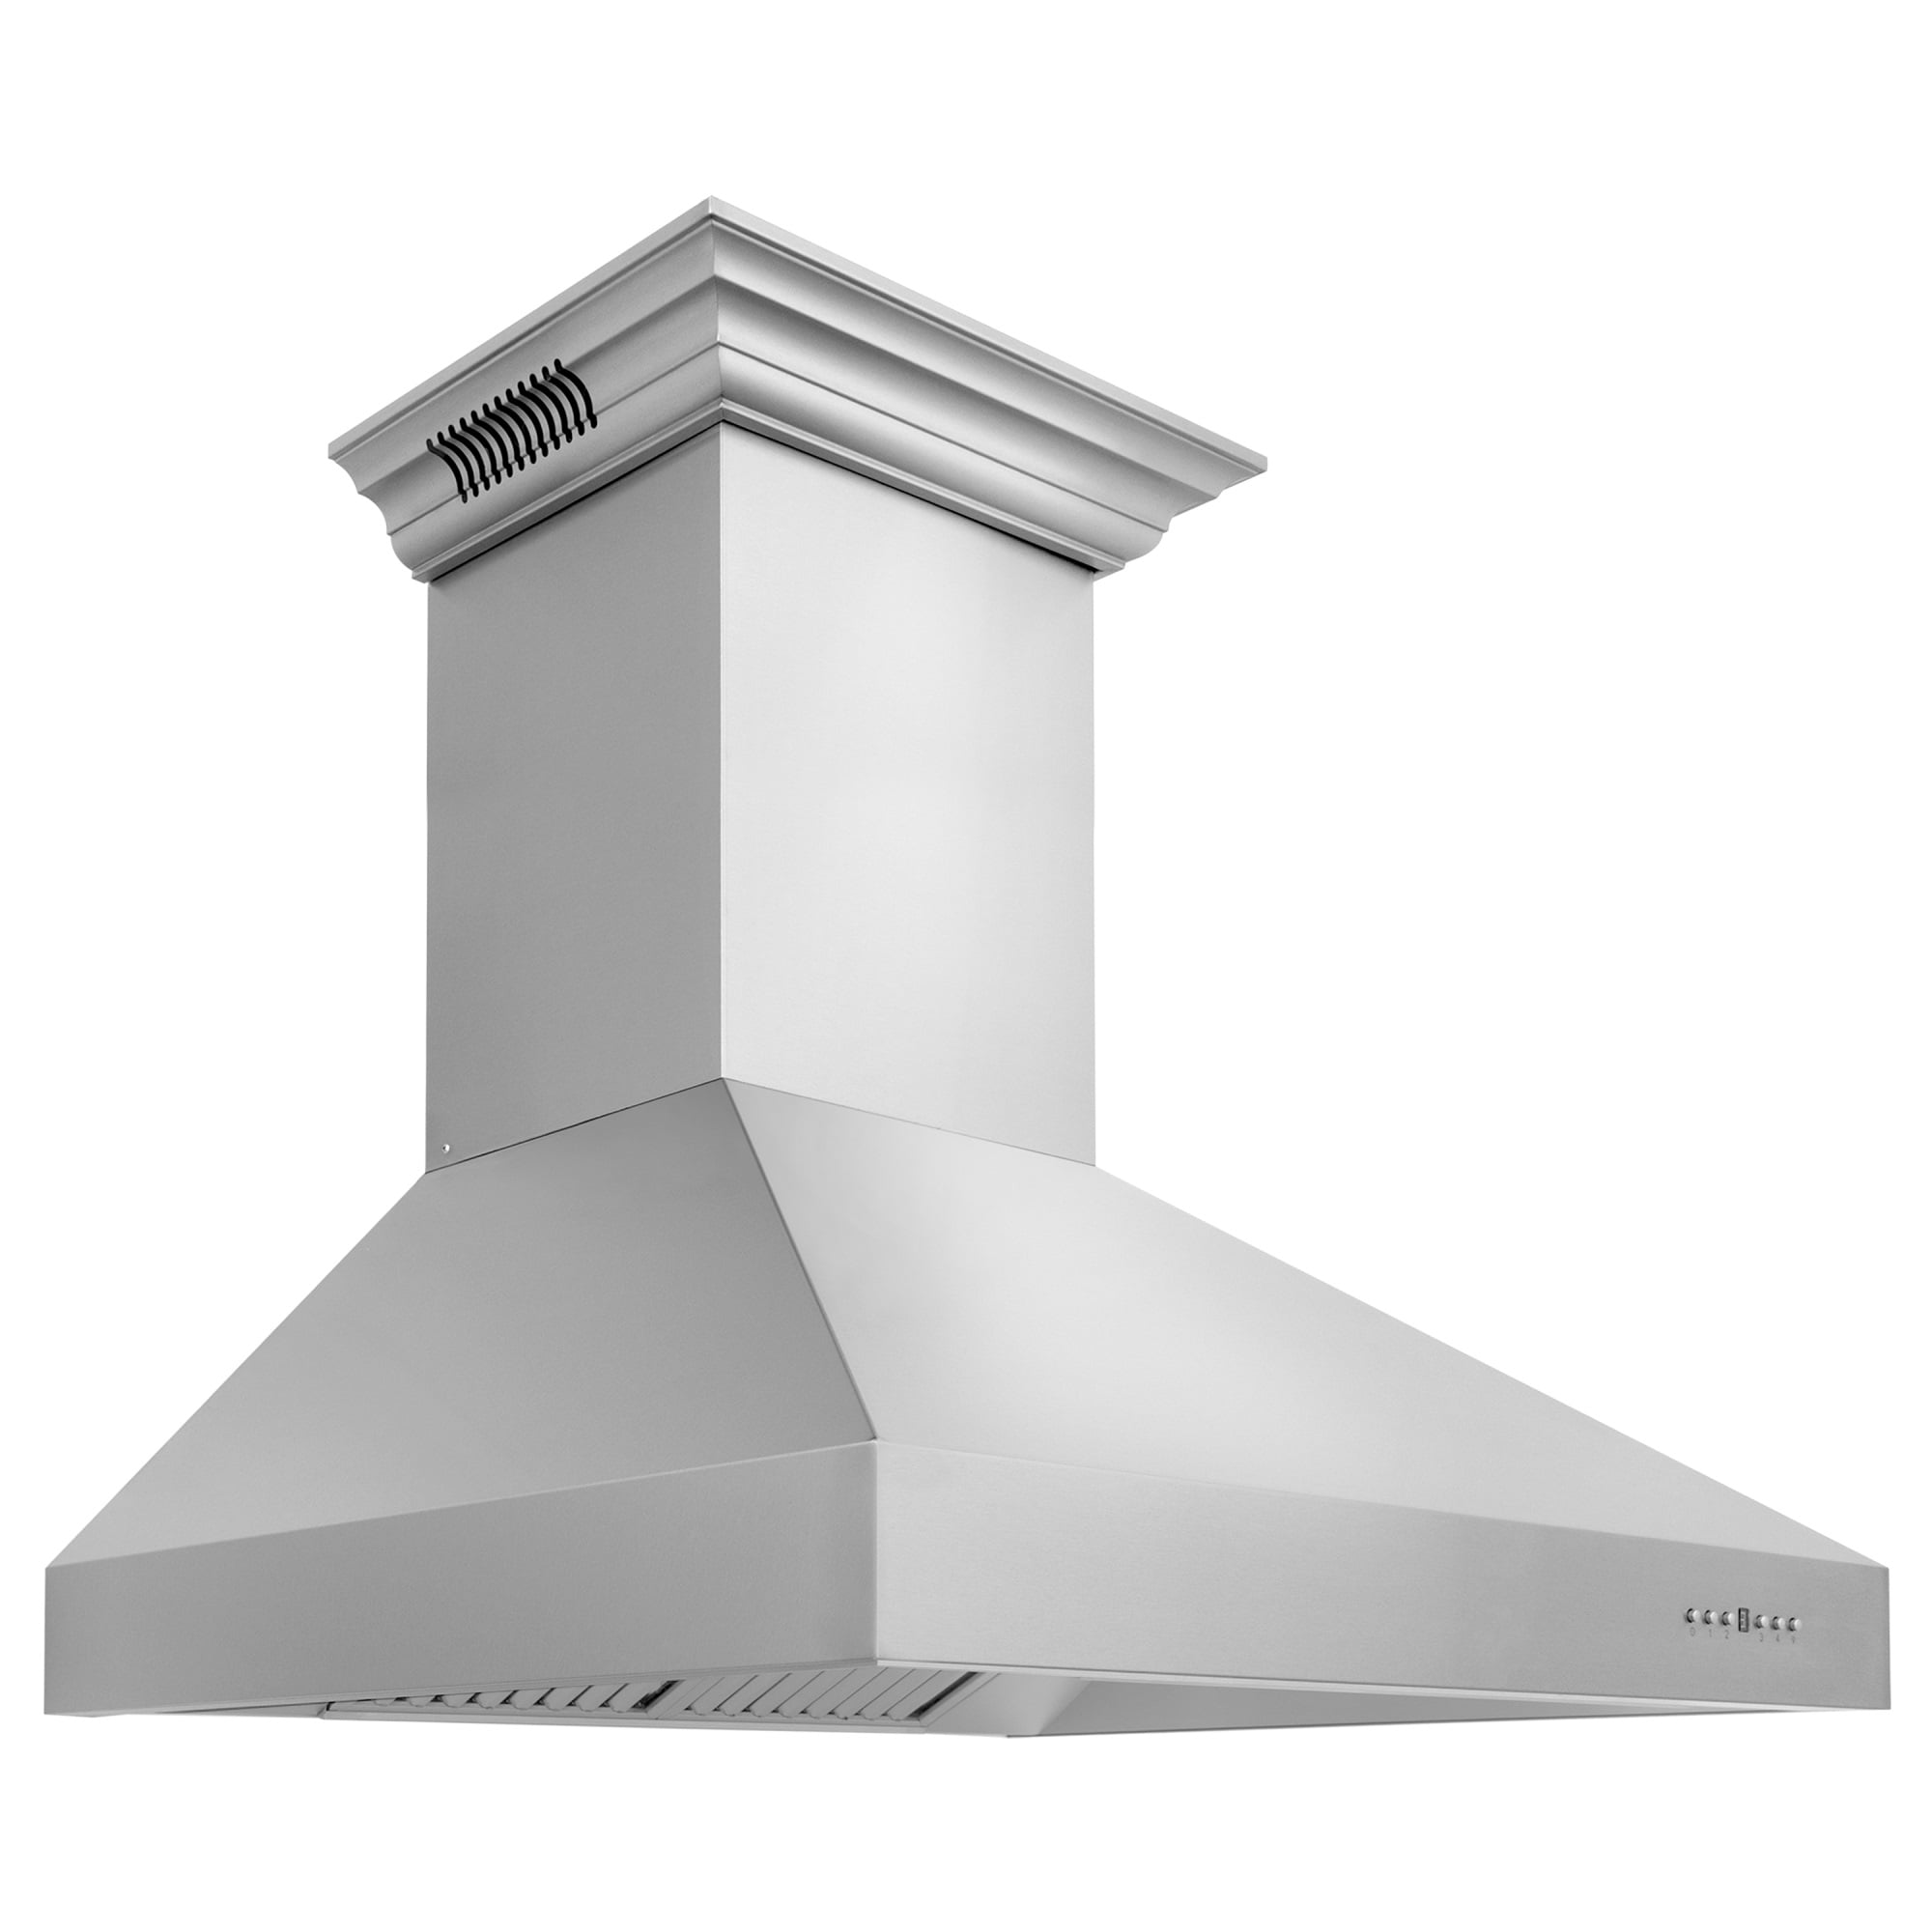 IKTCH Range Hoods 30 inch Wall Mount , 900 CFM Ducted/Ductless Range Hood with 4 Speed Fan, Pure Stainless Steel Range Hood 30 inch with Gesture